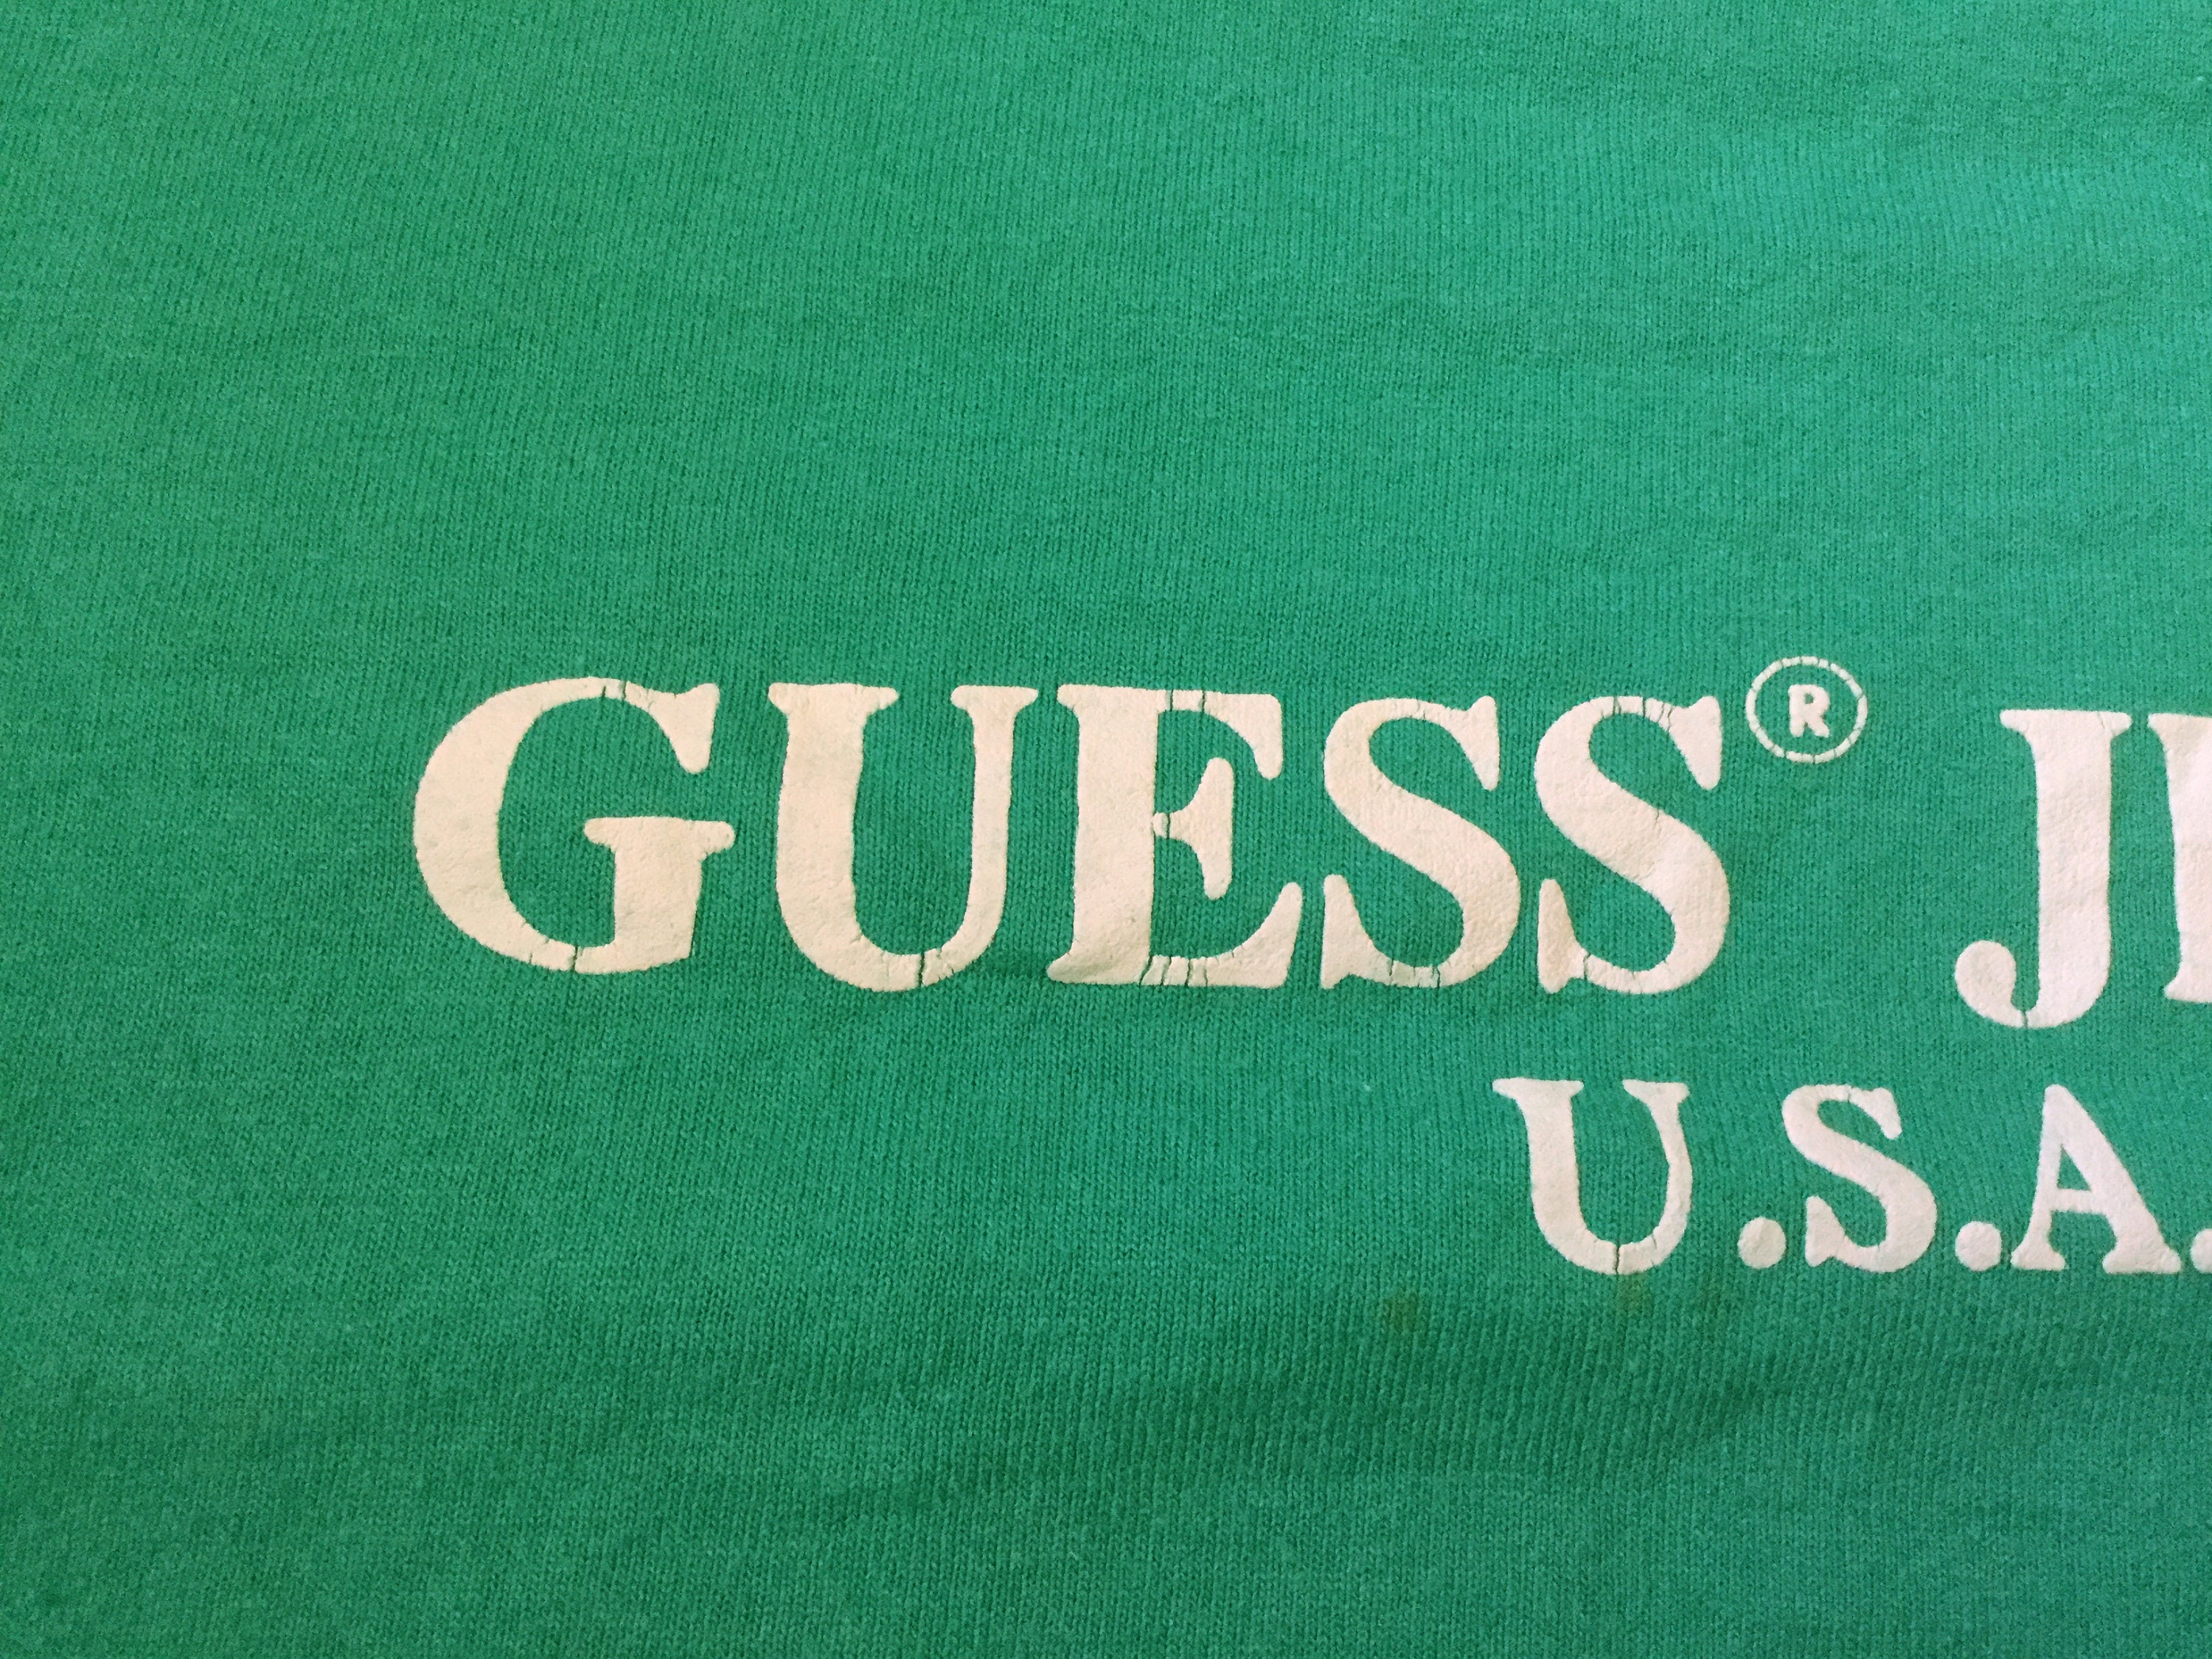 Vintage GUESS Jeans USA T-Shirt Turquoise Color Tee Shirt Made in usa ...